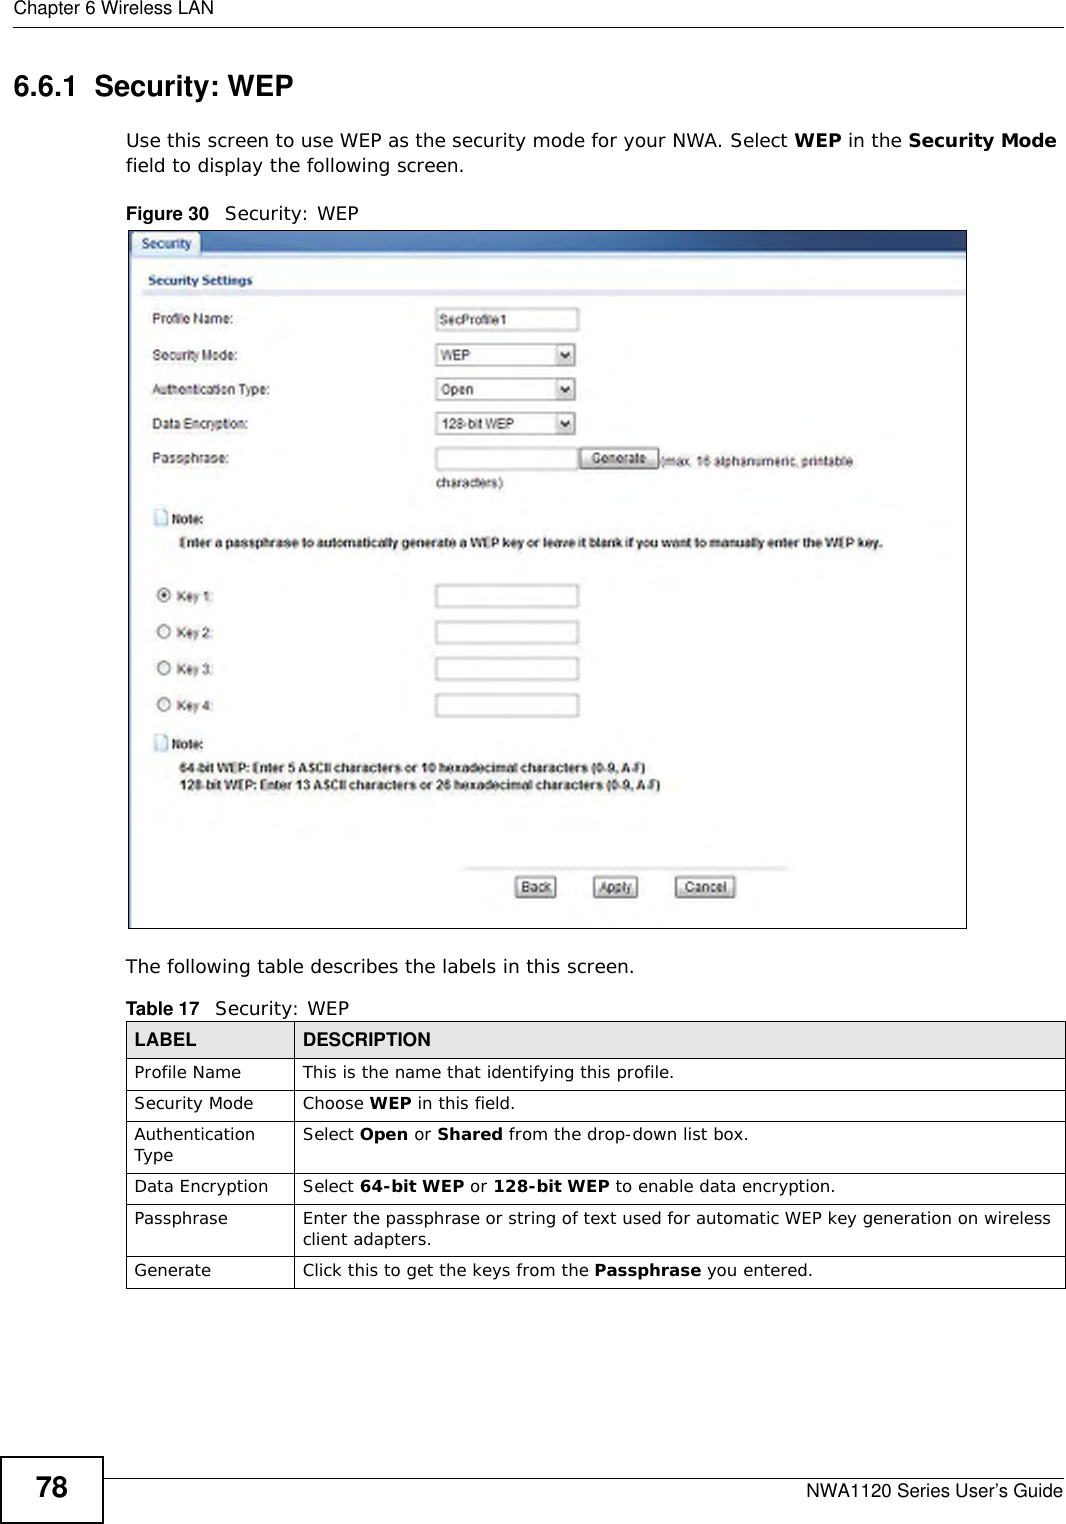 Chapter 6 Wireless LANNWA1120 Series User’s Guide786.6.1  Security: WEPUse this screen to use WEP as the security mode for your NWA. Select WEP in the Security Mode field to display the following screen.Figure 30   Security: WEPThe following table describes the labels in this screen.Table 17   Security: WEPLABEL DESCRIPTIONProfile Name This is the name that identifying this profile.Security Mode Choose WEP in this field.Authentication Type Select Open or Shared from the drop-down list box. Data Encryption Select 64-bit WEP or 128-bit WEP to enable data encryption.  Passphrase Enter the passphrase or string of text used for automatic WEP key generation on wireless client adapters. Generate Click this to get the keys from the Passphrase you entered.